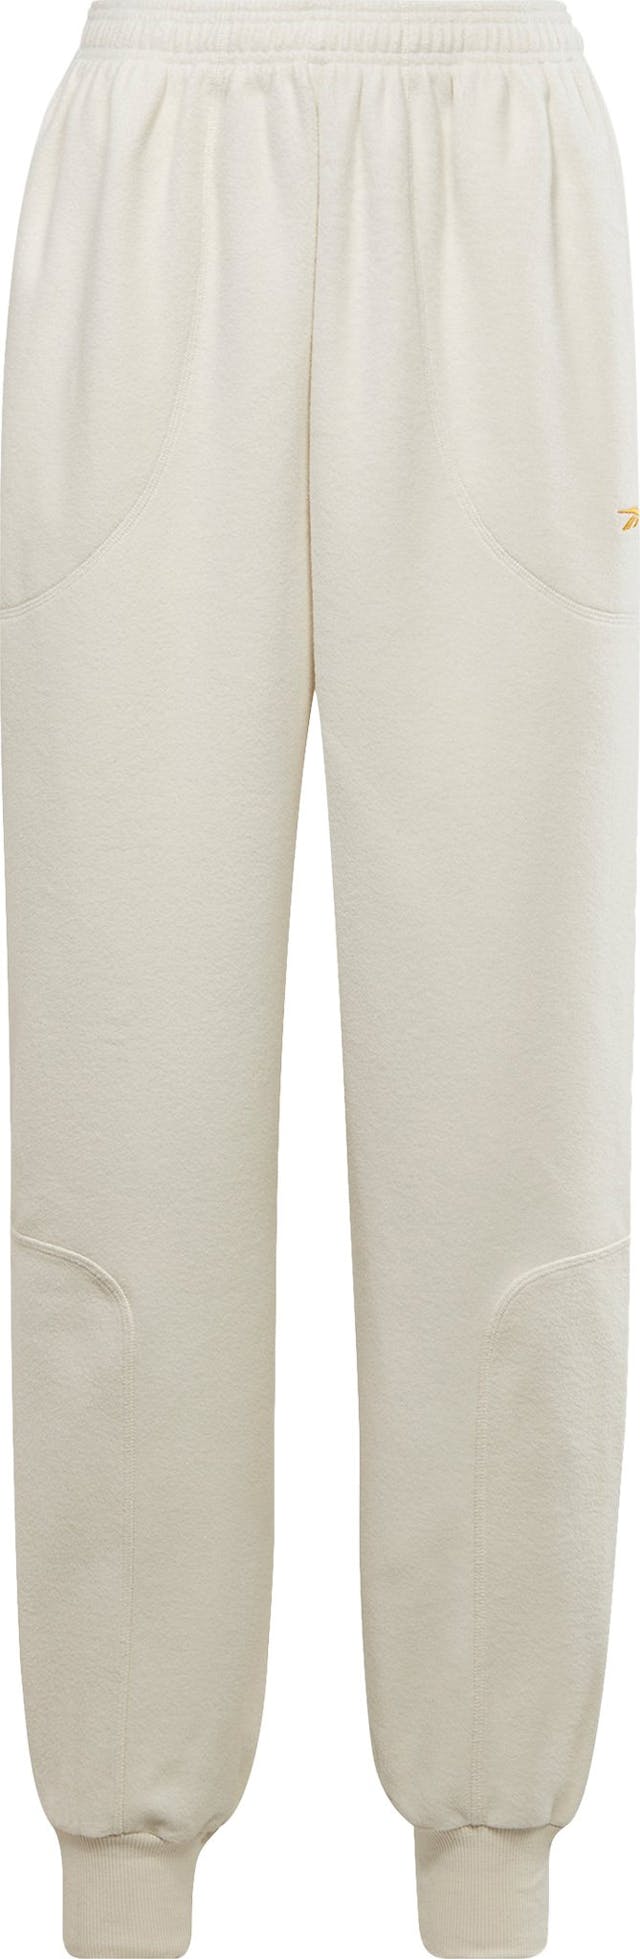 Product image for MYT Joggers - Women's